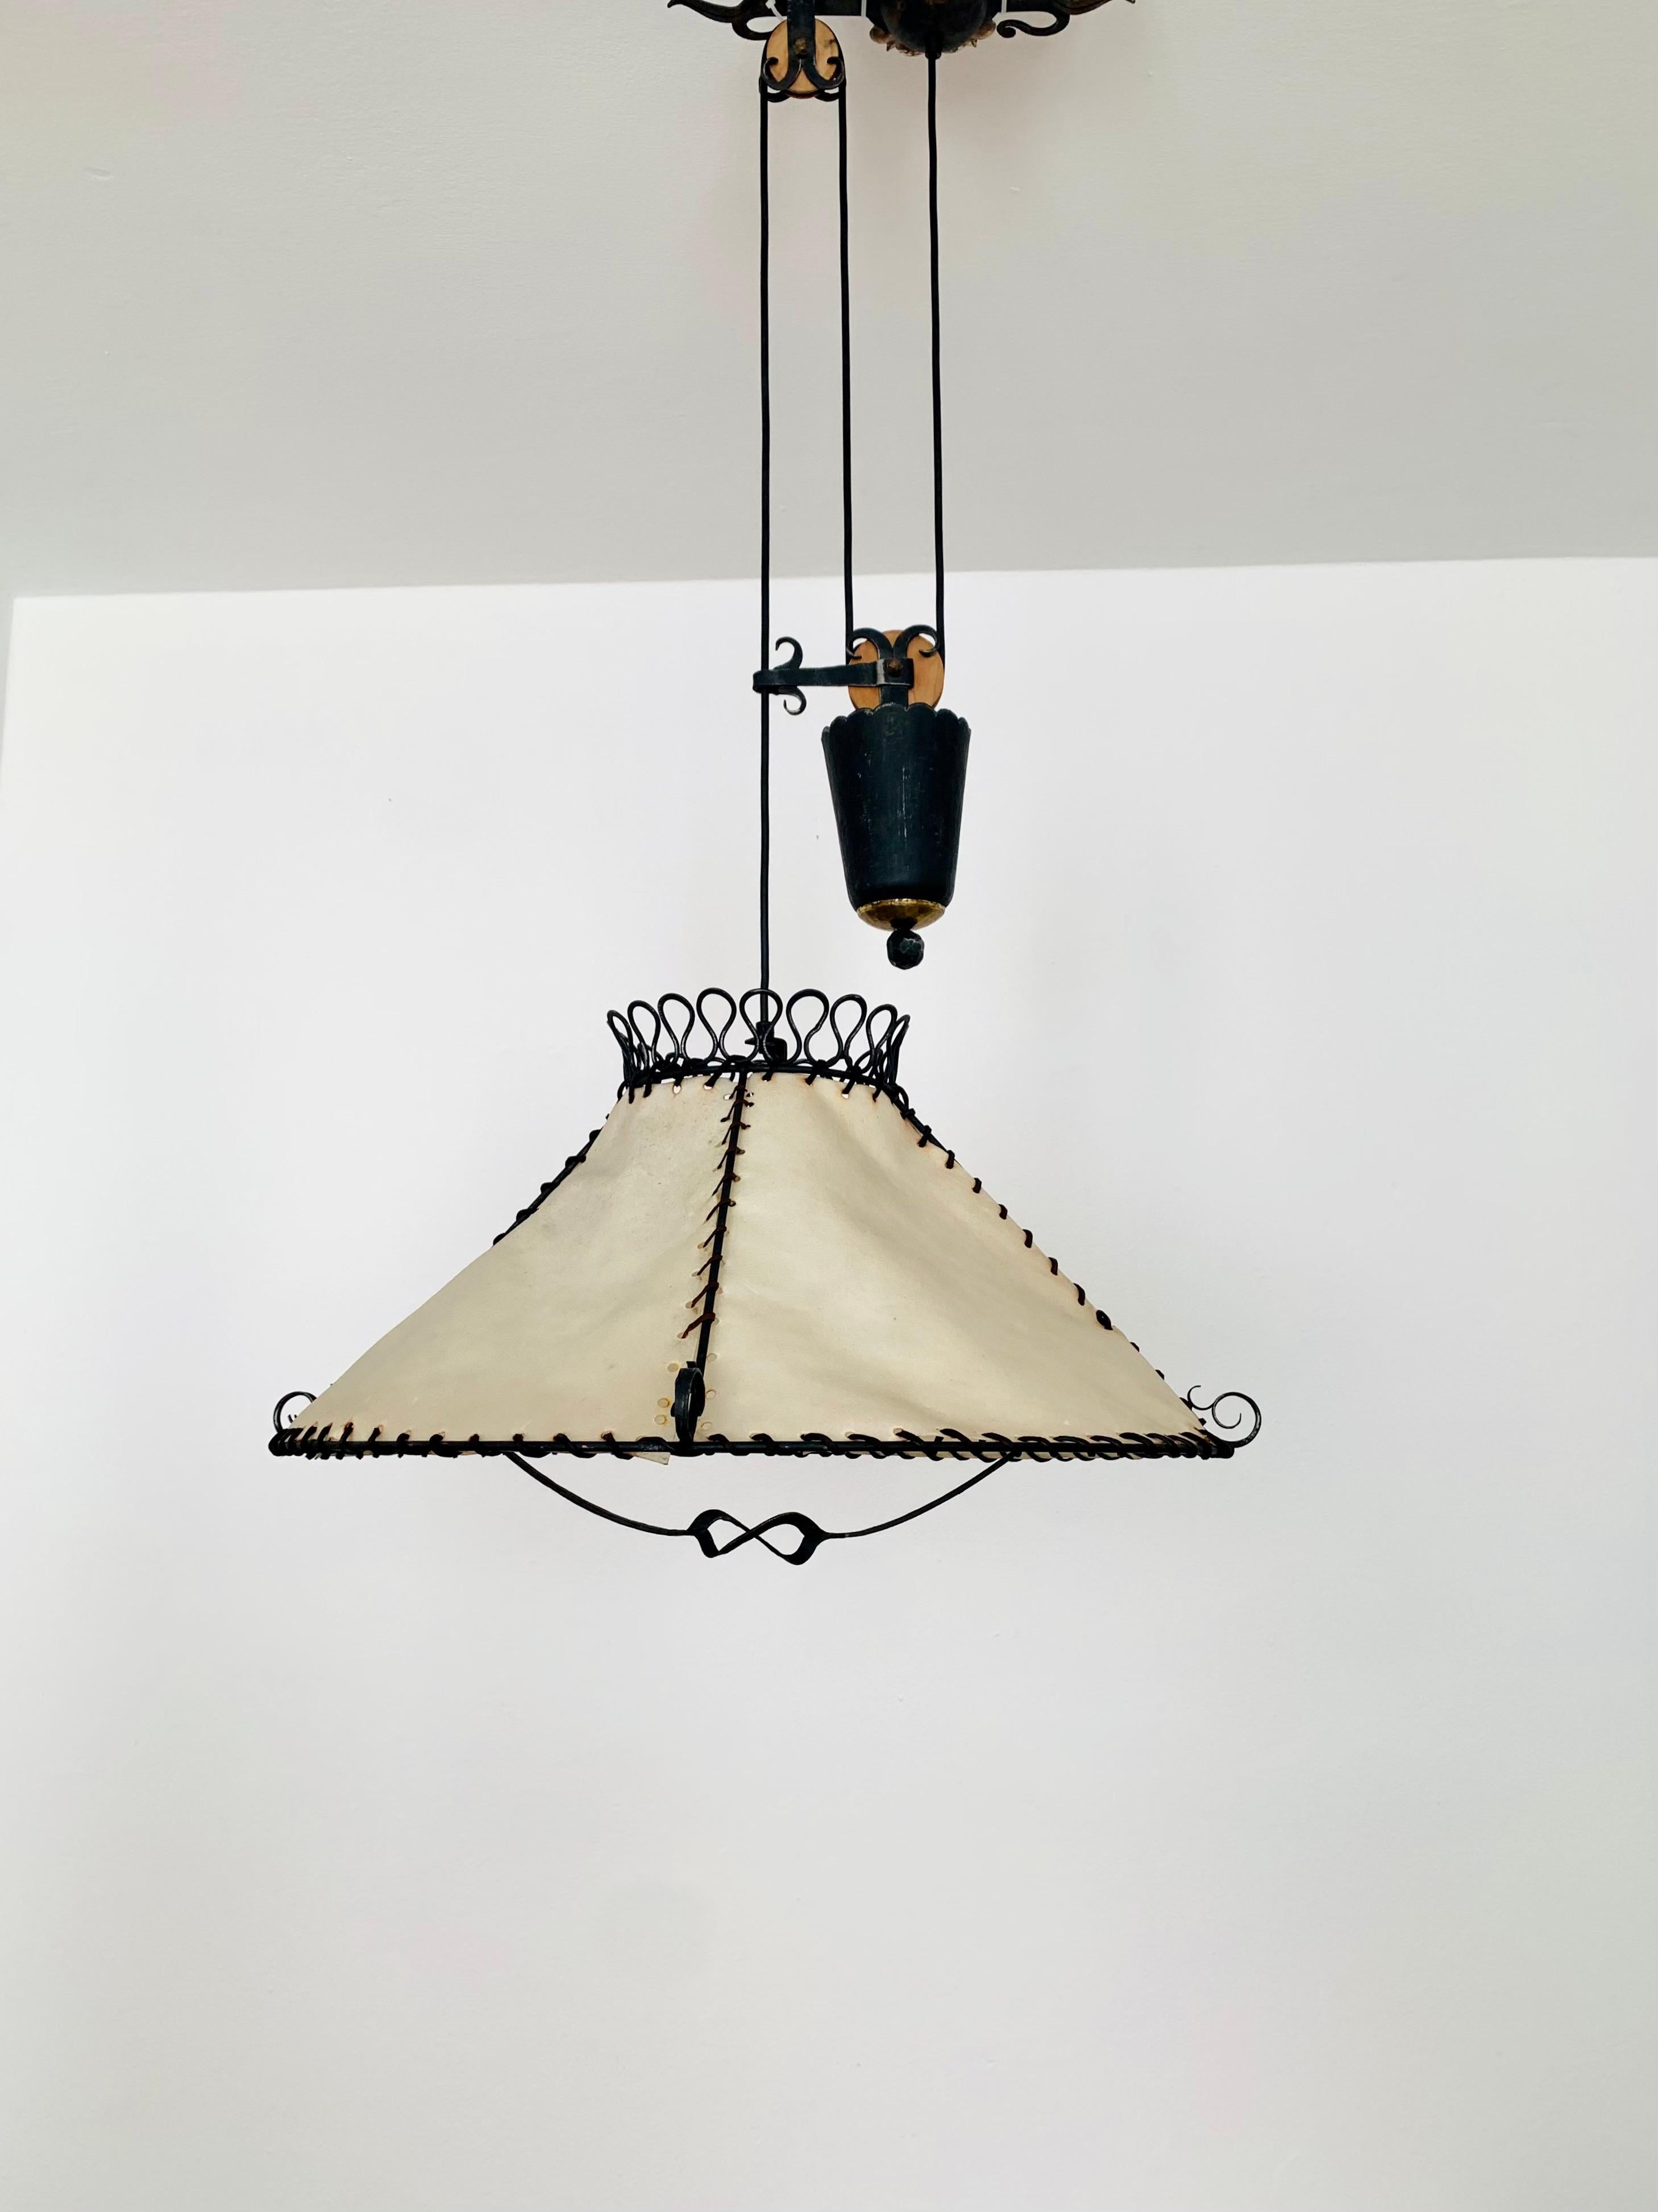 Exceptional height -adjustable pendant lamp from the 1950s.
High quality and detailed workmanship.
The leather creates a cozy light.

Condition:

Very good vintage condition with slight signs of wear.
Very nice patina on the iron.
The leather straps